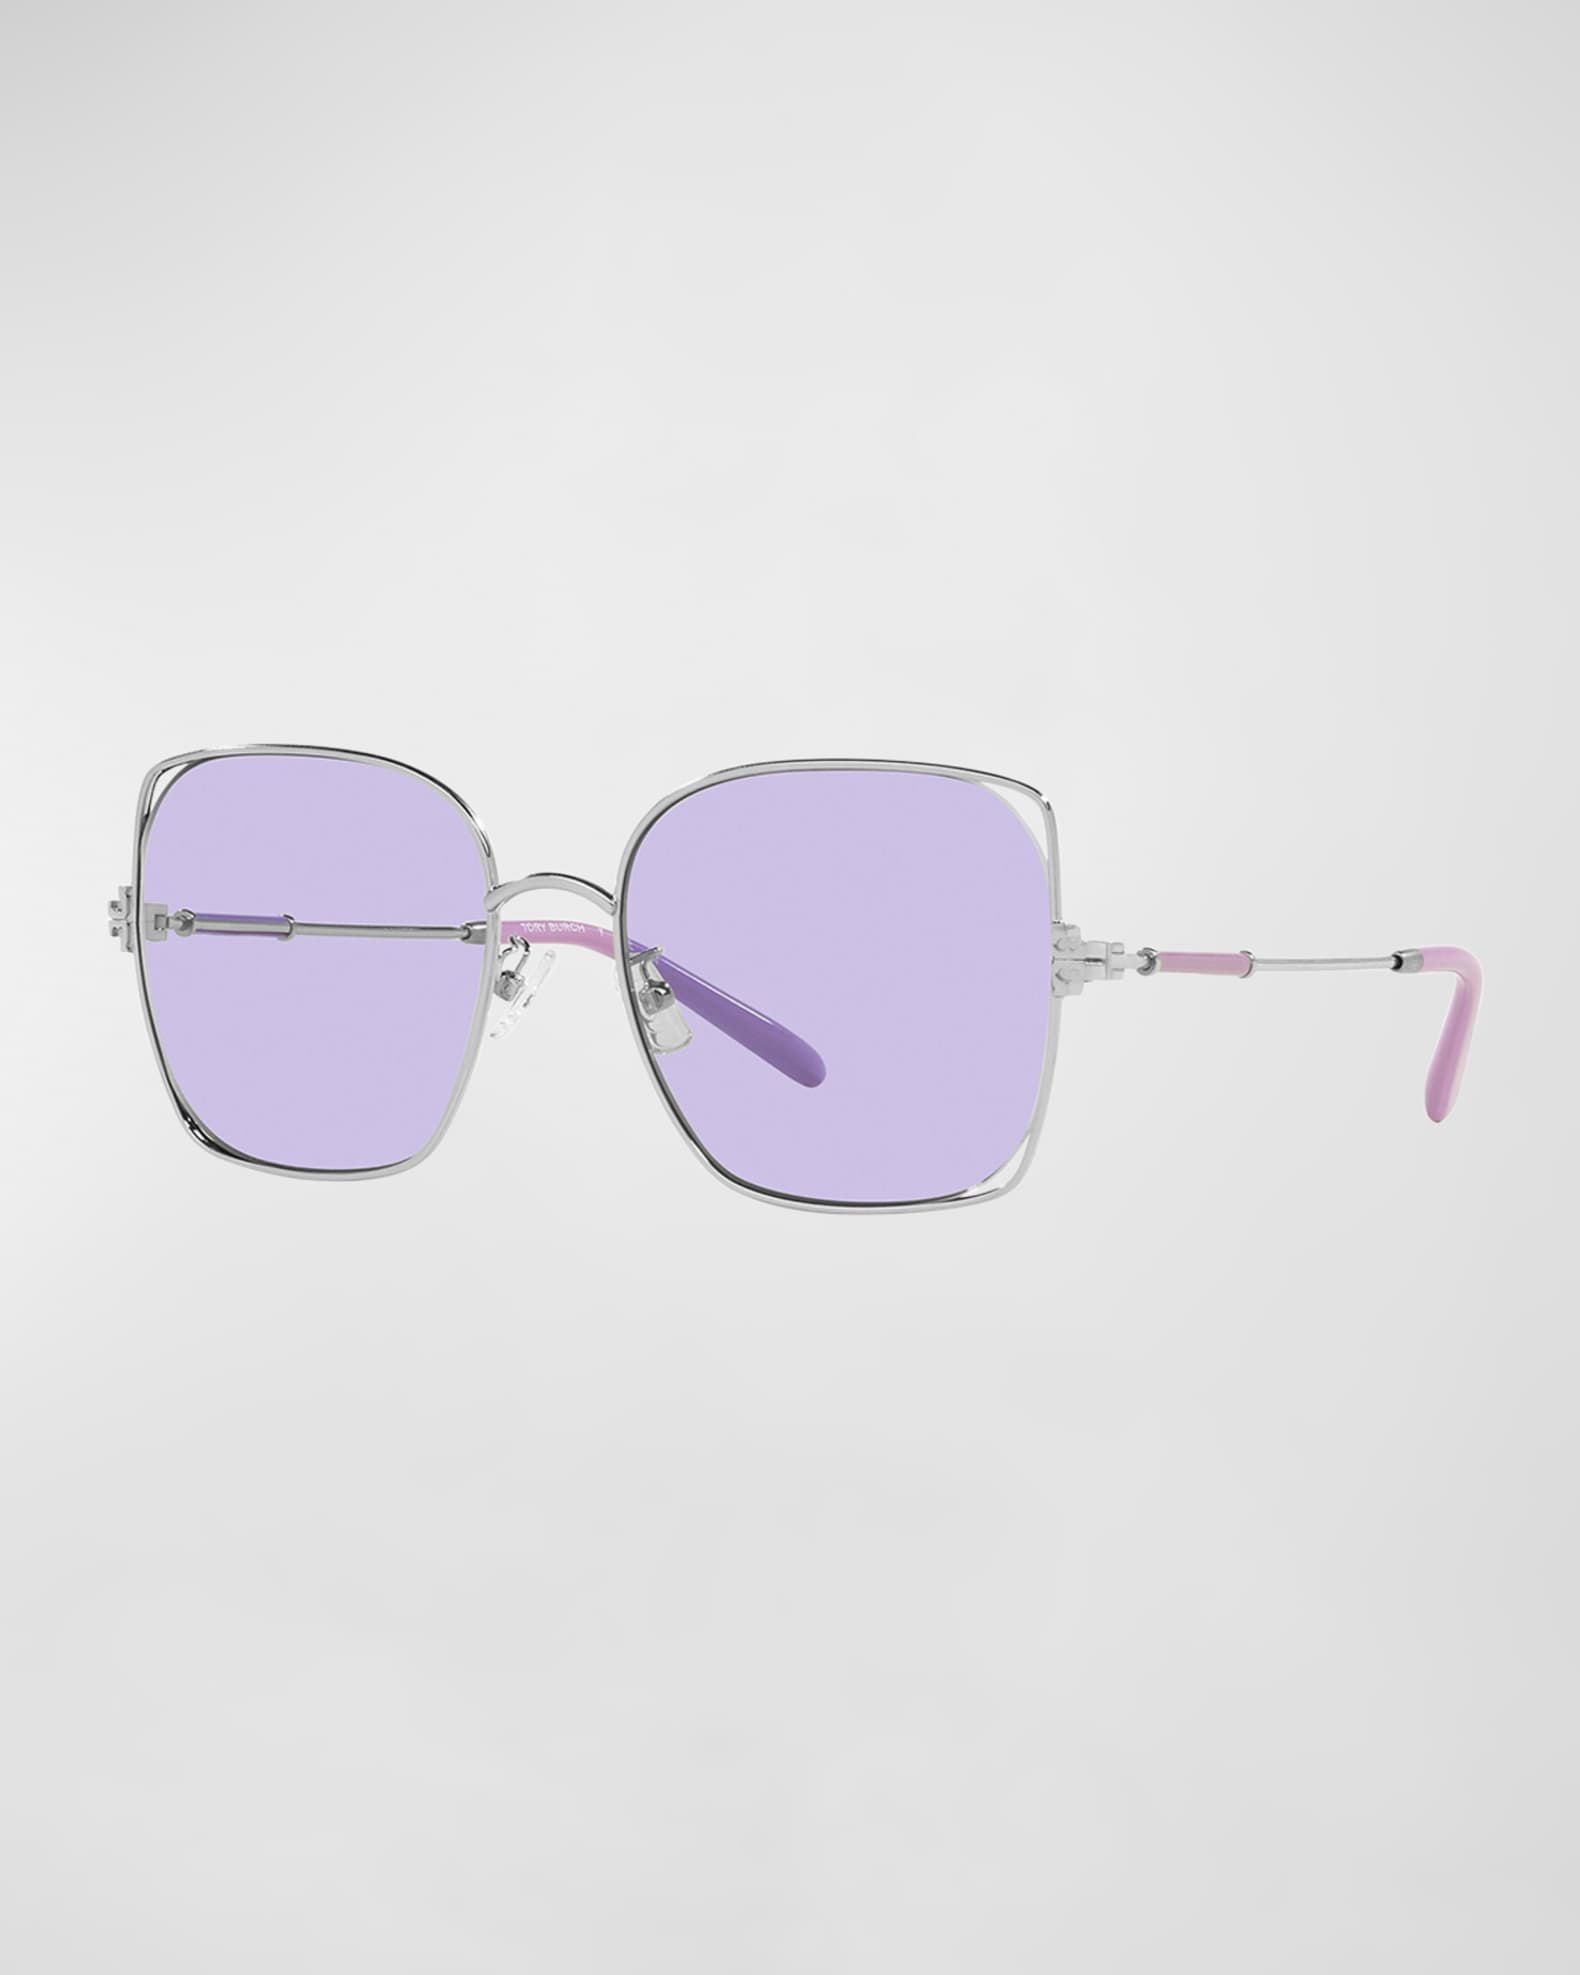 Tory Burch Cut-Out Metal & Plastic Butterfly Sunglasses | Neiman Marcus